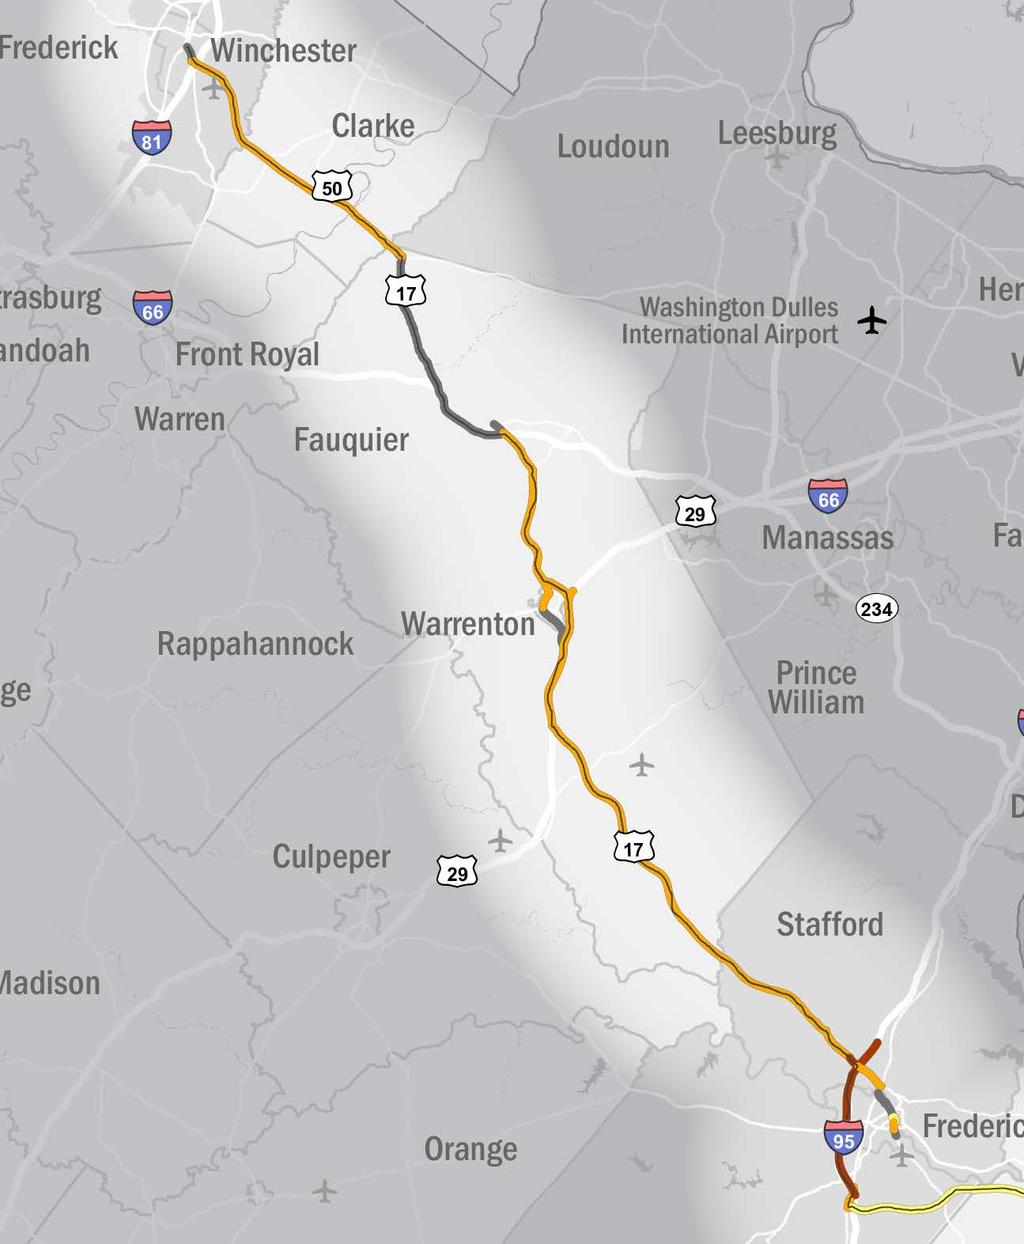 The segment includes portions that overlap with I-66, I-95, US 1, US 29, and US 50.